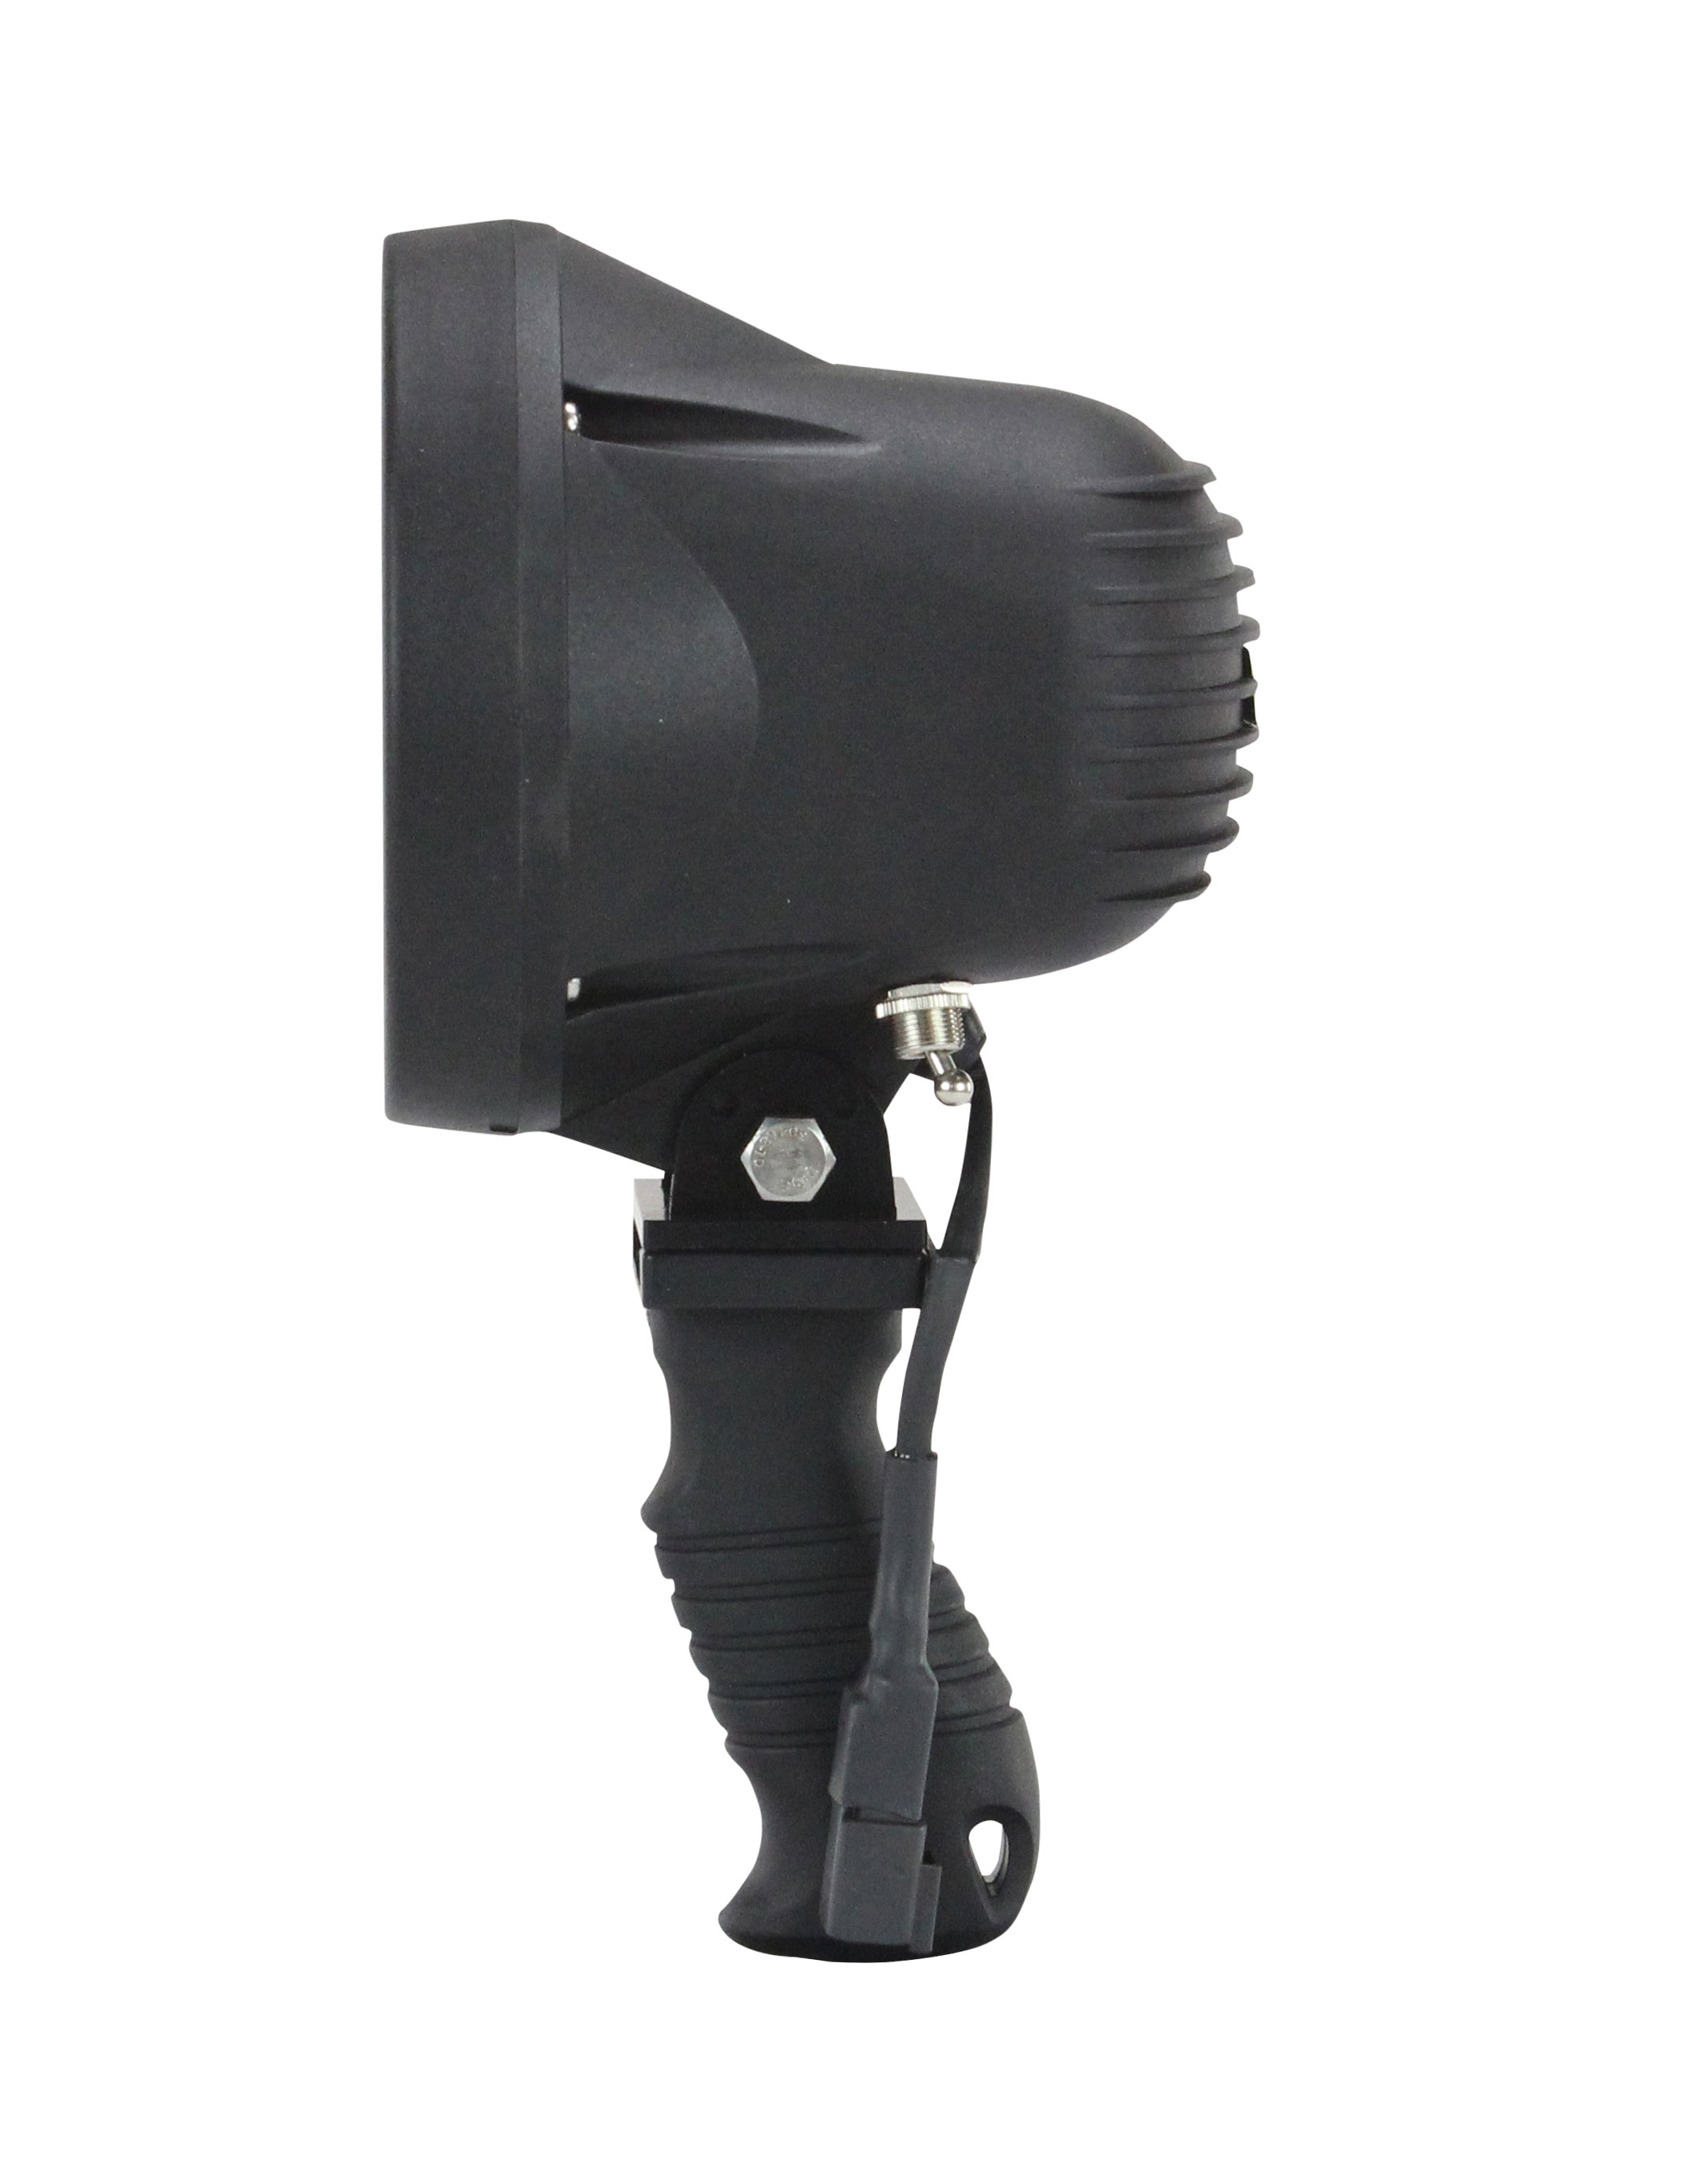 HUL-18-TRP Handheld Spotlight with 16' Cord Ending in a Trailer Plug